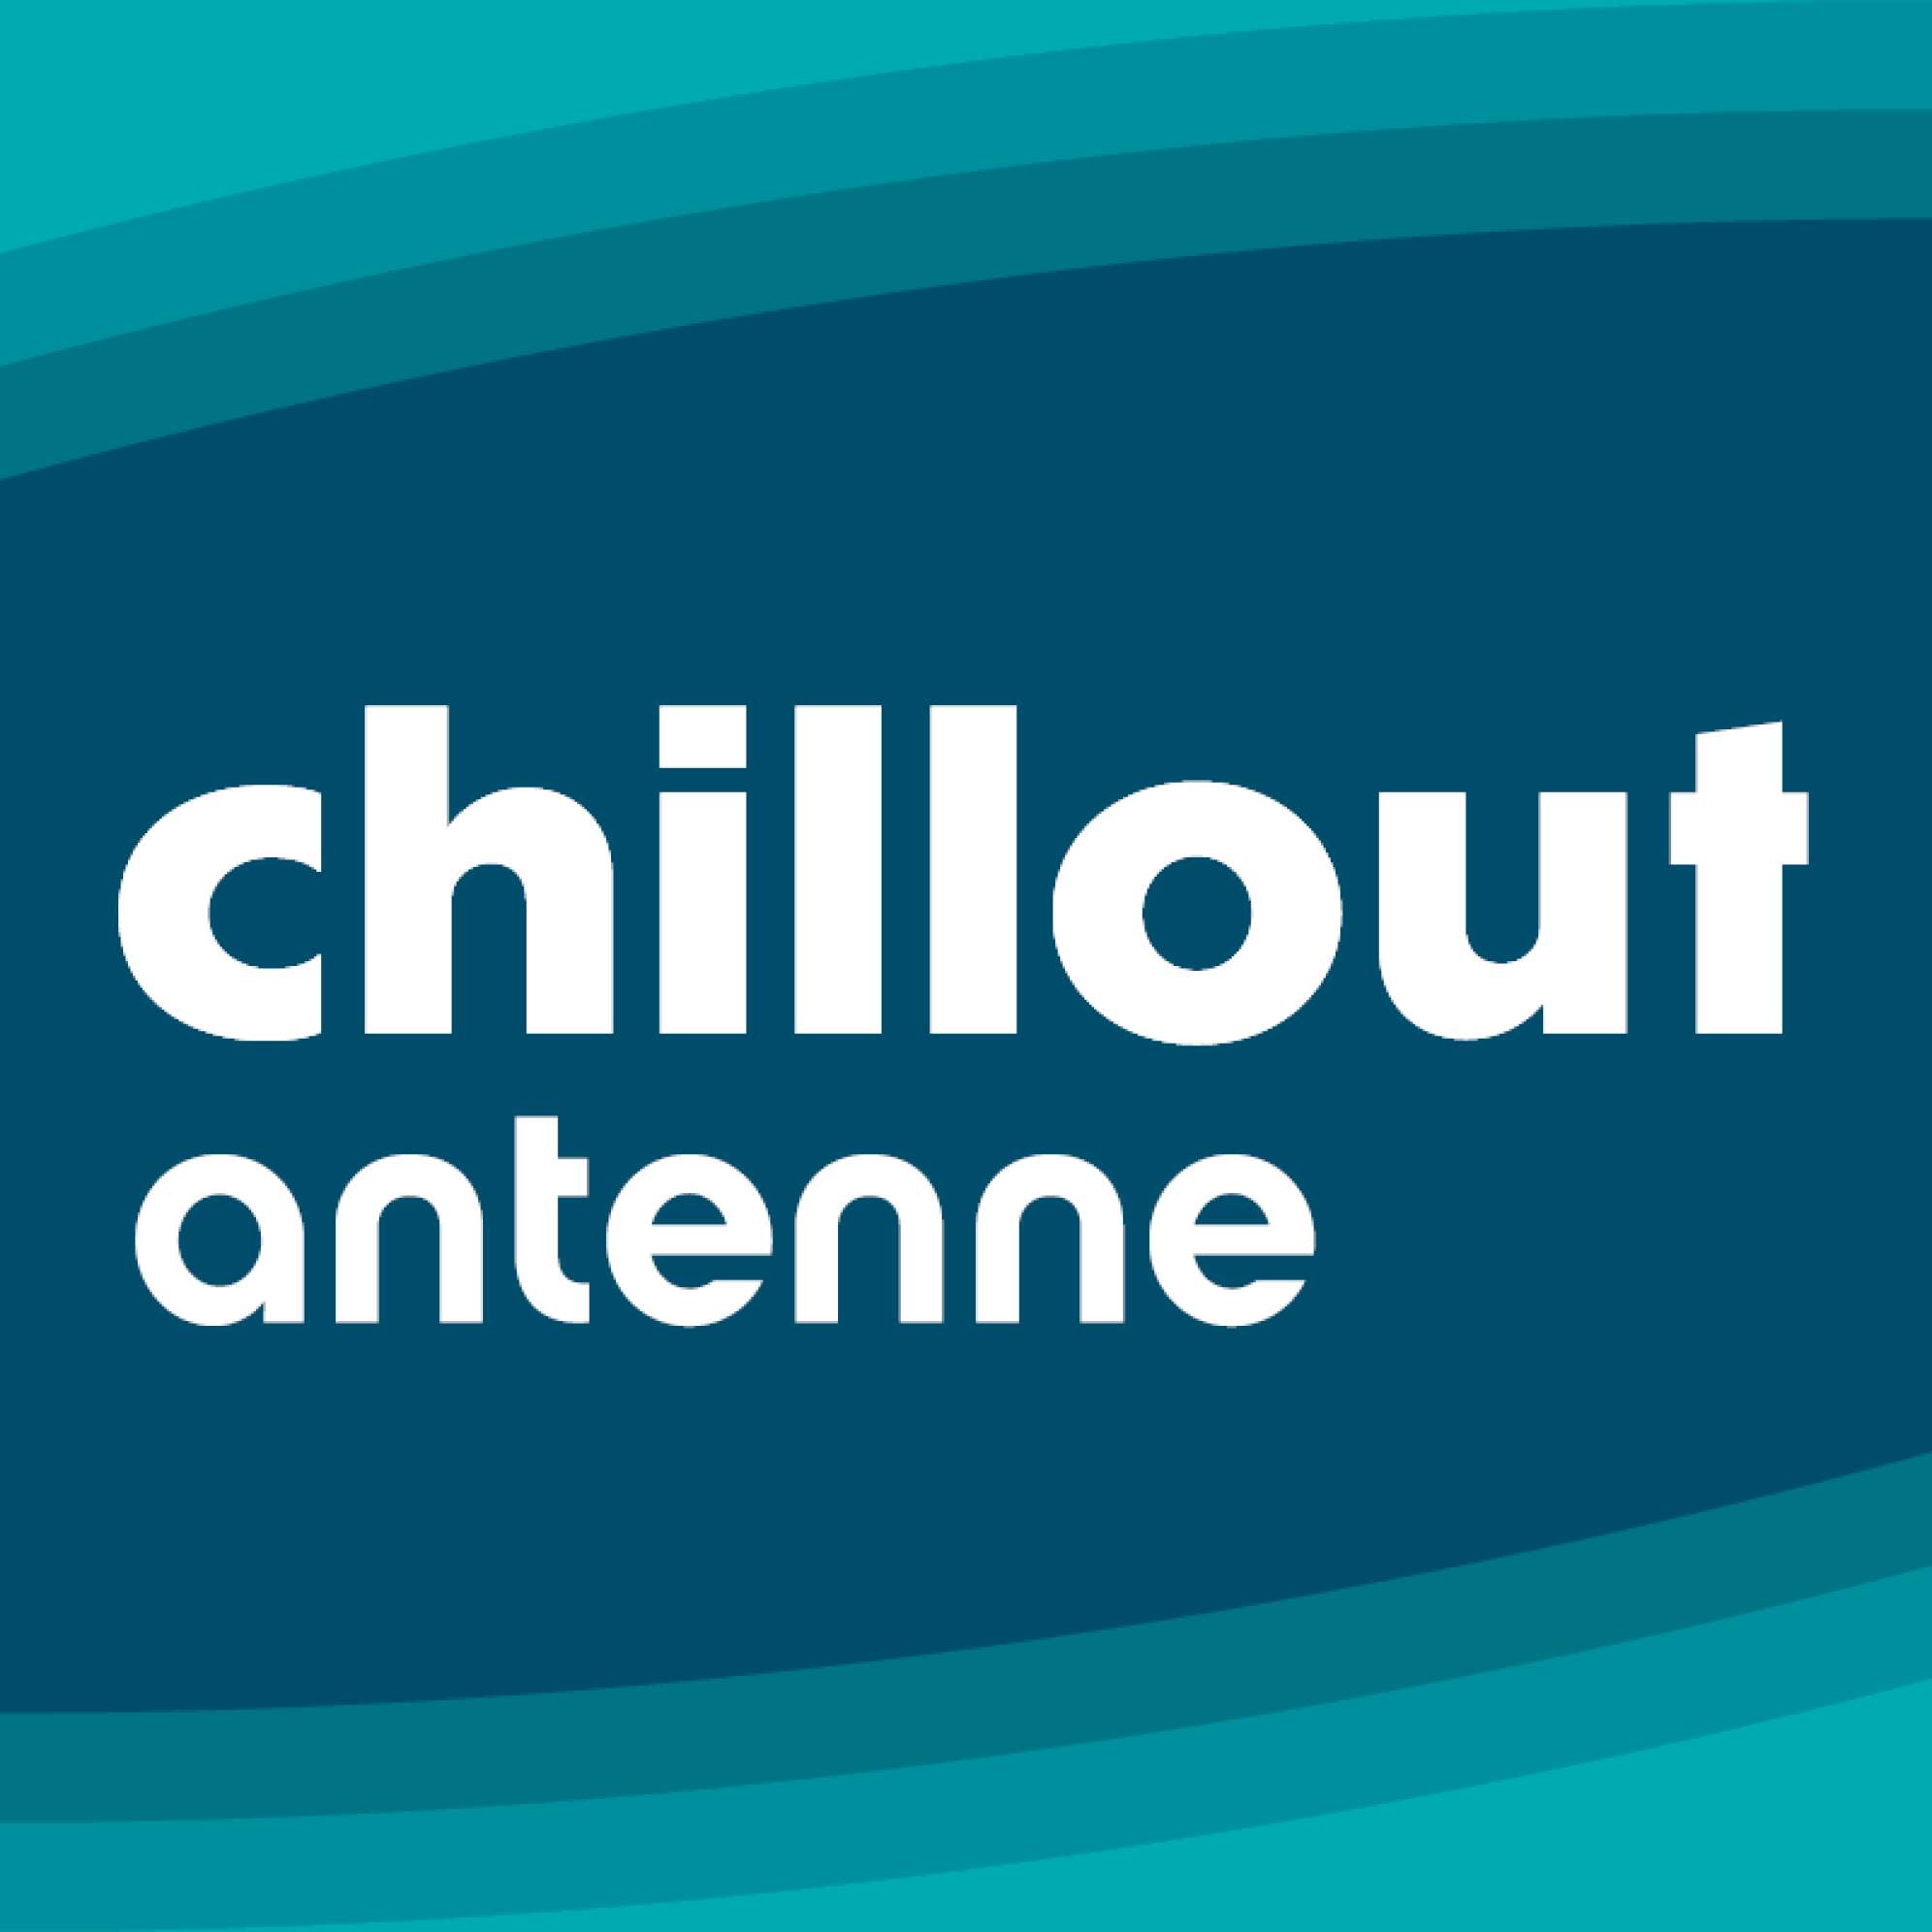 CHILLOUT ANTENNE